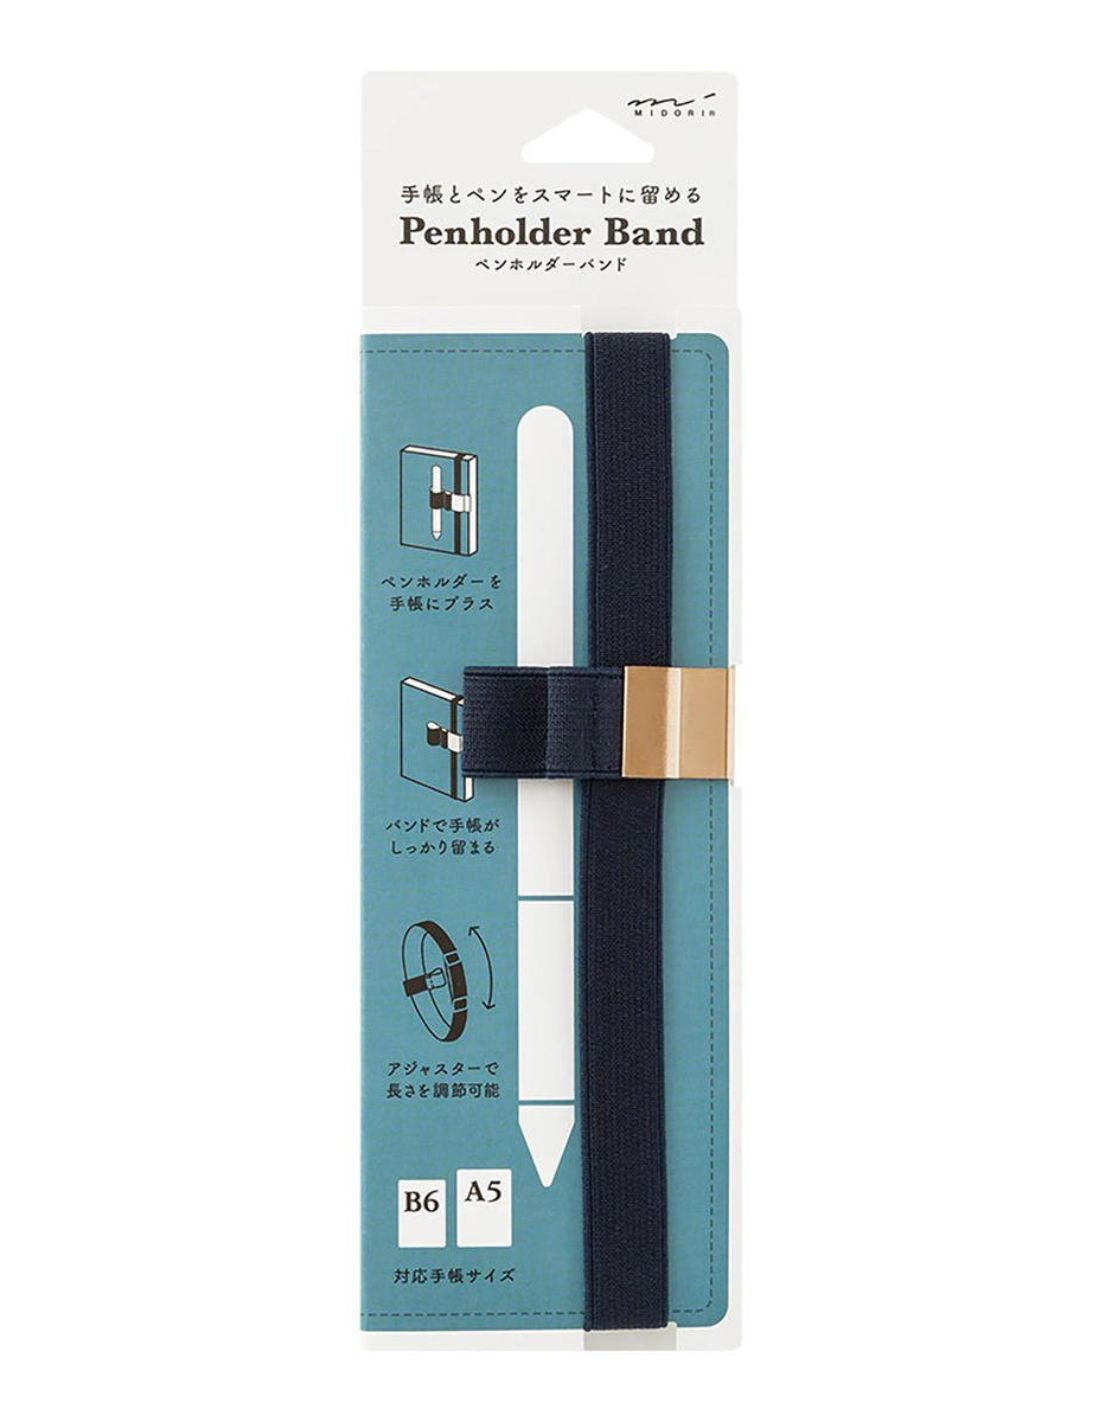 Penholder Band for A5 and B6 notebooks - Blue - Midori